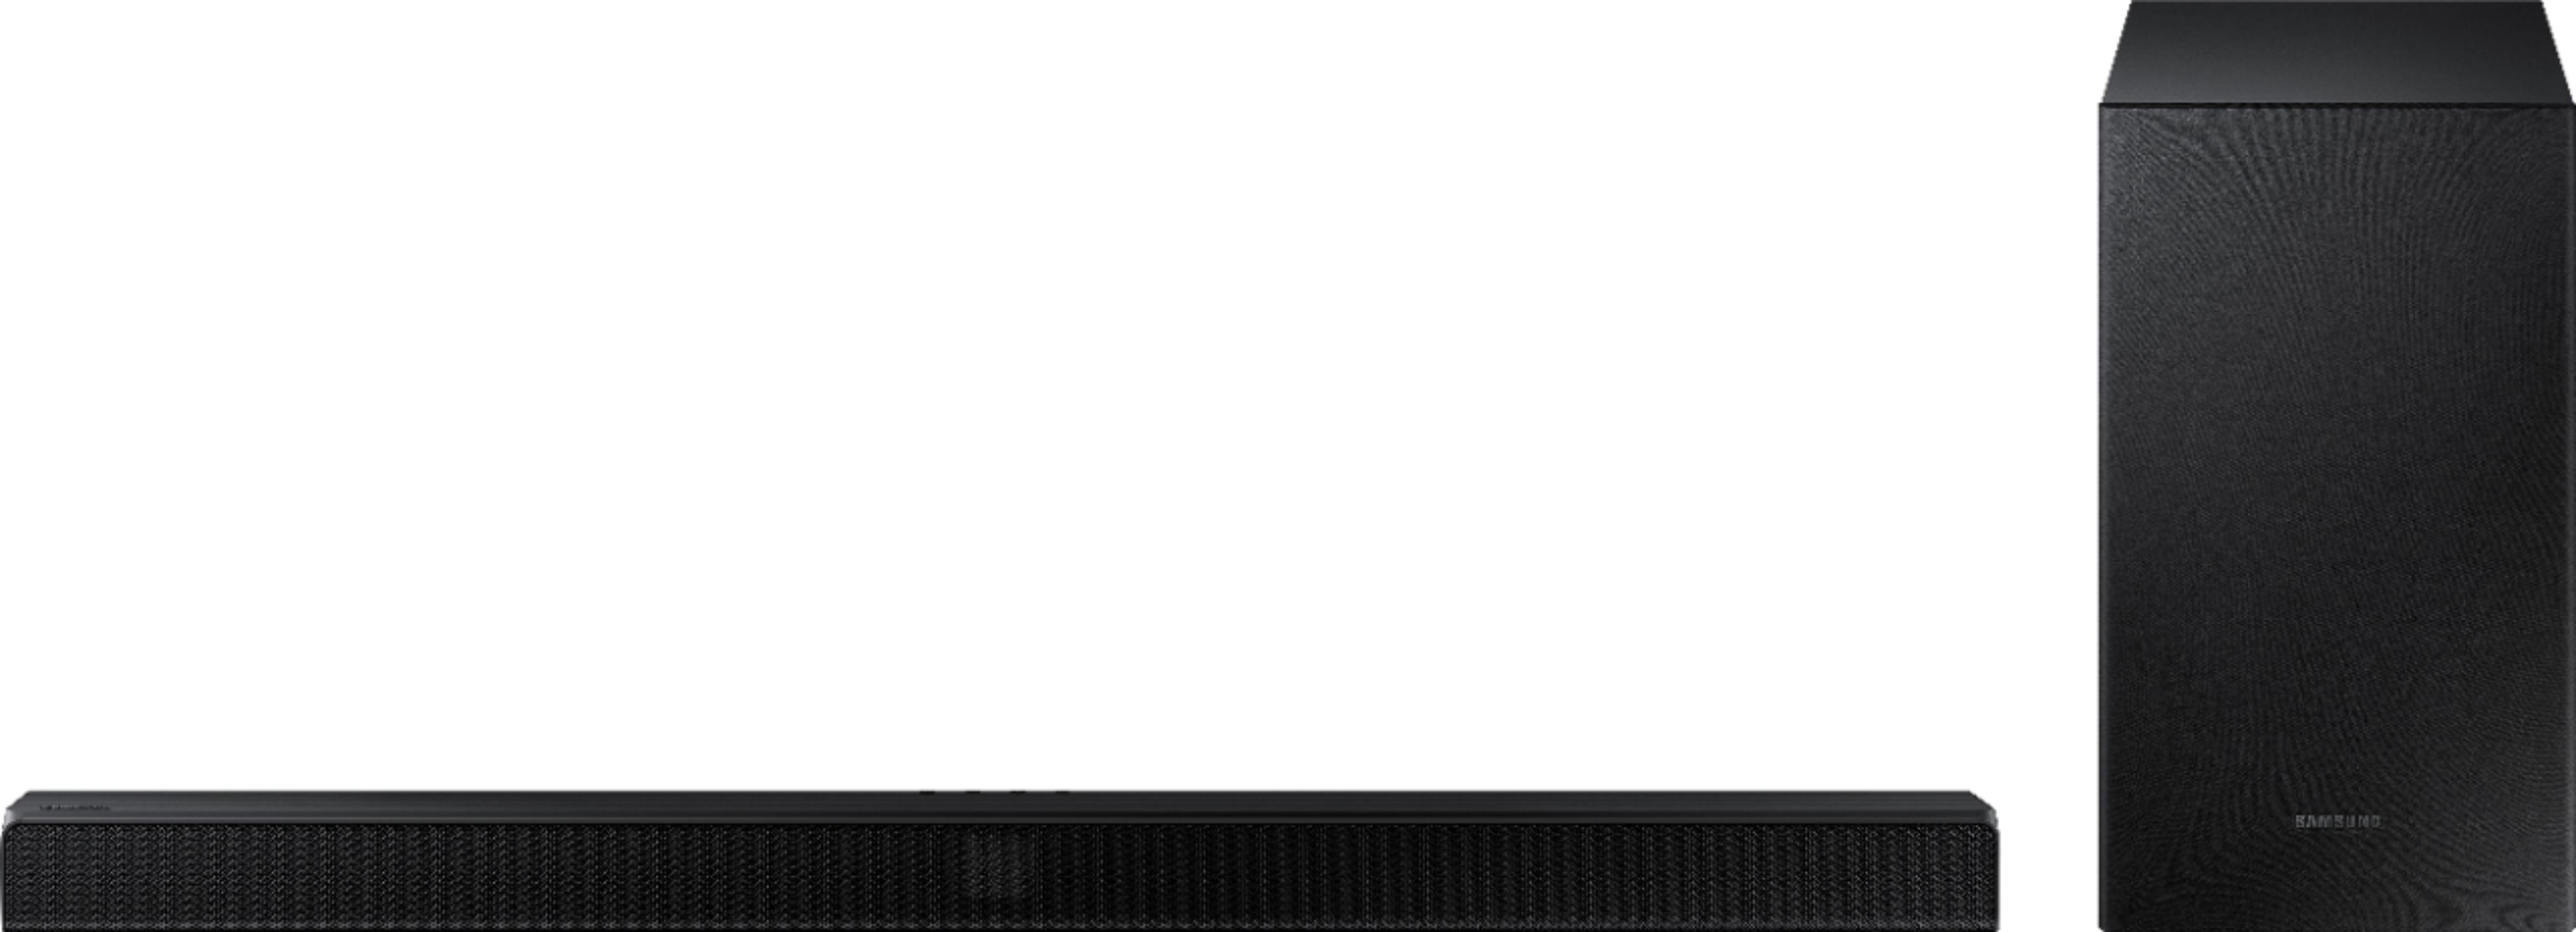 Samsung 2.1-Channel Soundbar with Wireless Subwoofer and Dolby Audio Black - Best Buy